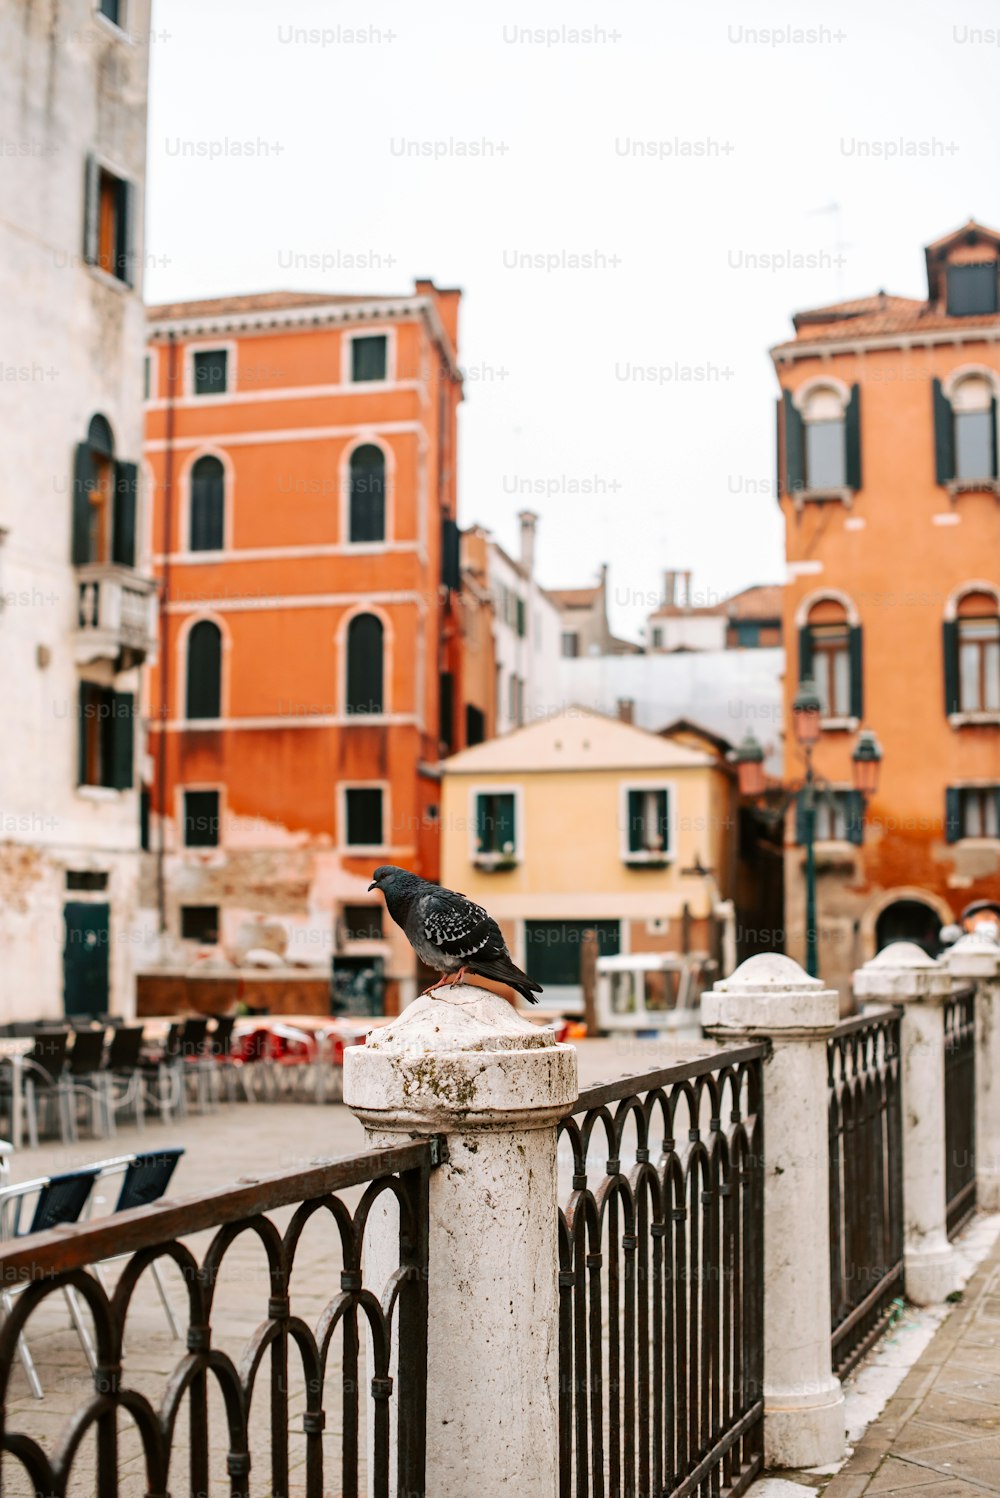 a bird sitting on a fence in front of some buildings